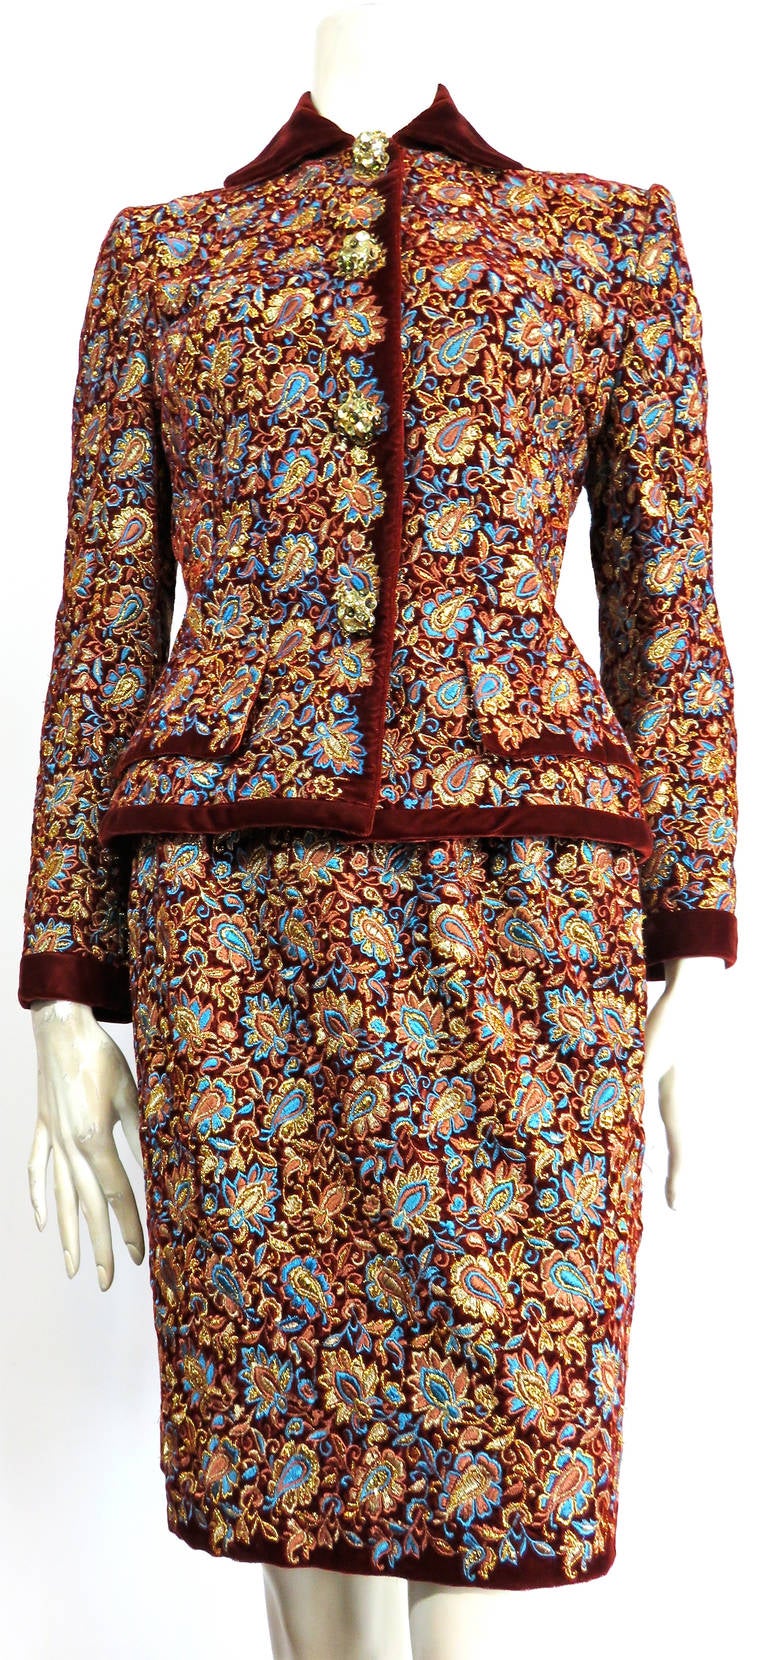 Gorgeous, 1980's OSCAR DE LA RENTA all-over, embroidered velvet evening skirt suit.

This all-over embroidered skirt suit was designed by Oscar de la Renta during the 1980's in New York, and is made in the USA, as labeled.

The base fabric is a